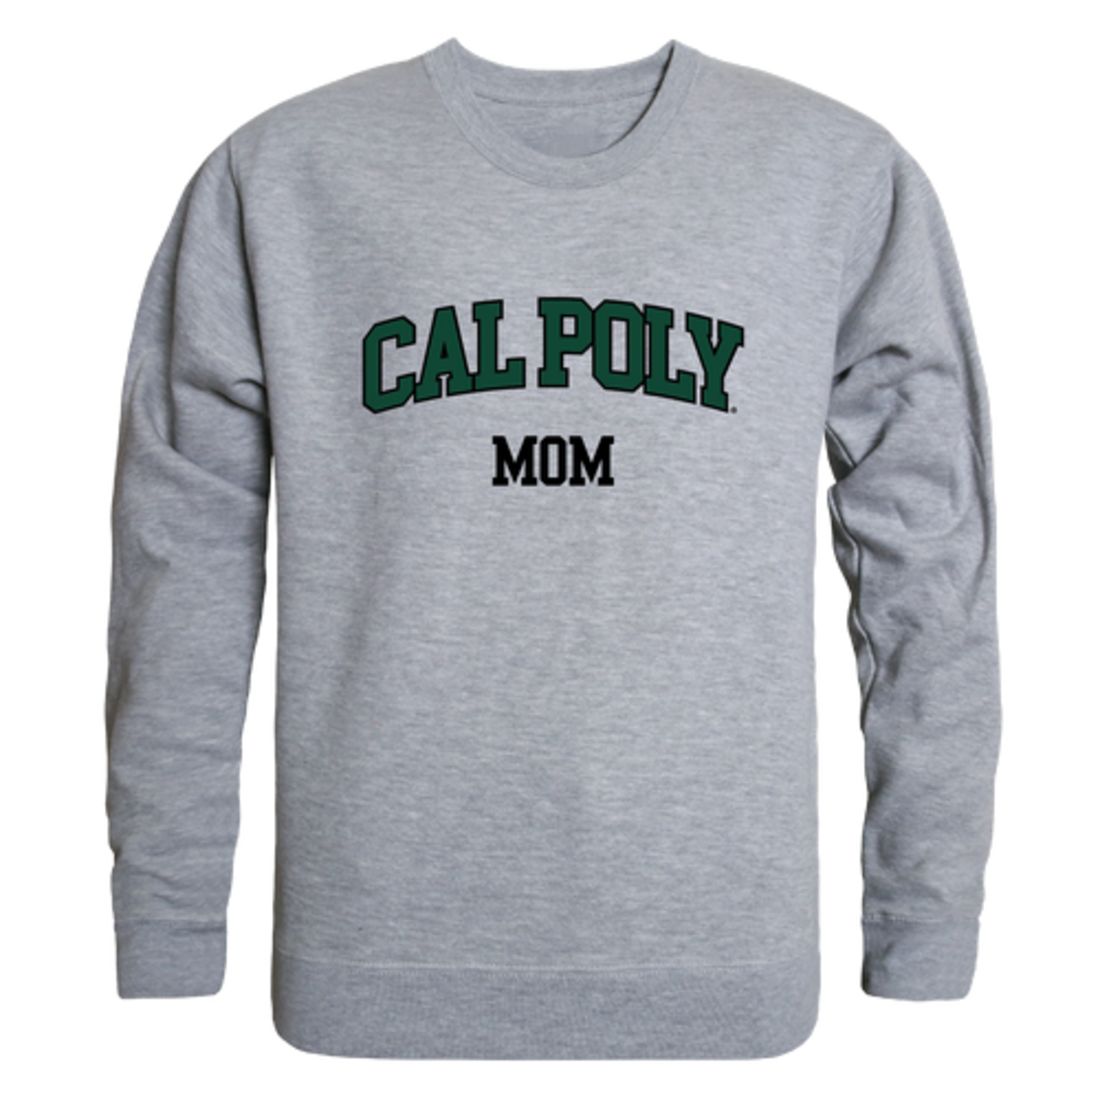 Cal Poly California Polytechnic State University Mustangs Mom Fleece Crewneck Pullover Sweatshirt Forest Small-Campus-Wardrobe